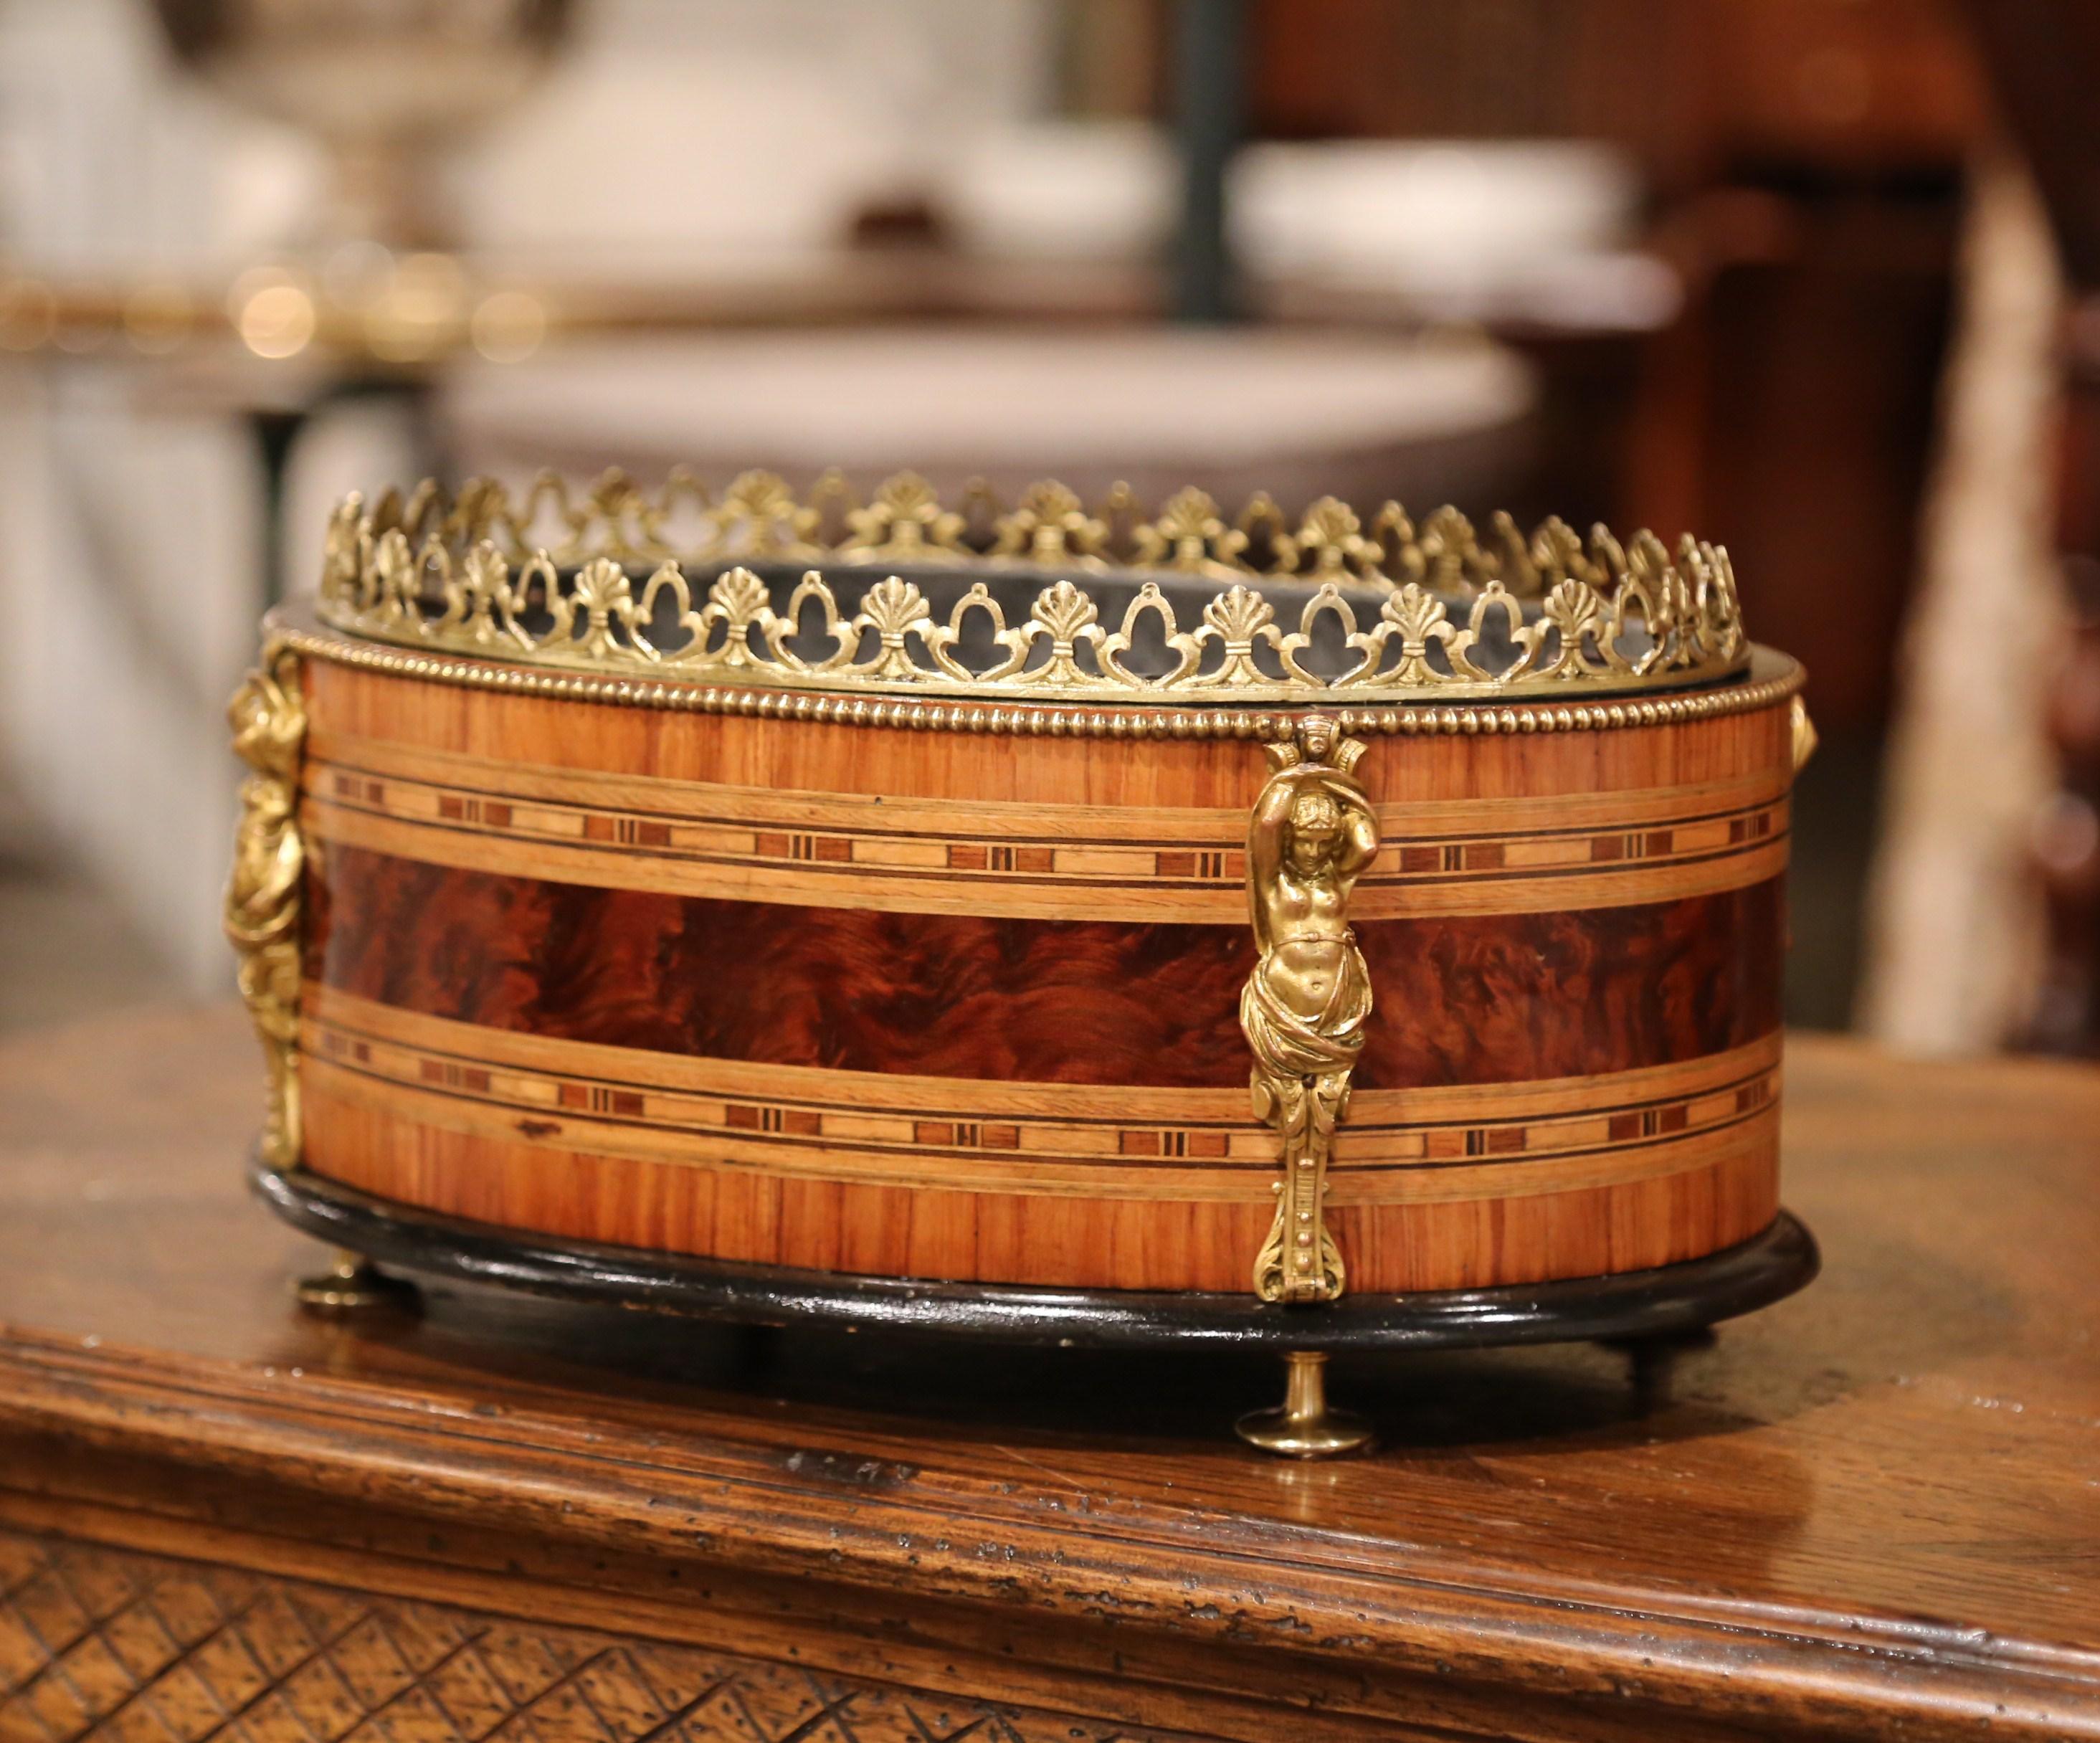 Decorate a dining table or a chest with this elegant, antique oval planter. Crafted in France, circa 1880 the fruit wood jardinière sits on bronze round feet. The jardinière features inlay marquetry geometric decor using different essences of wood